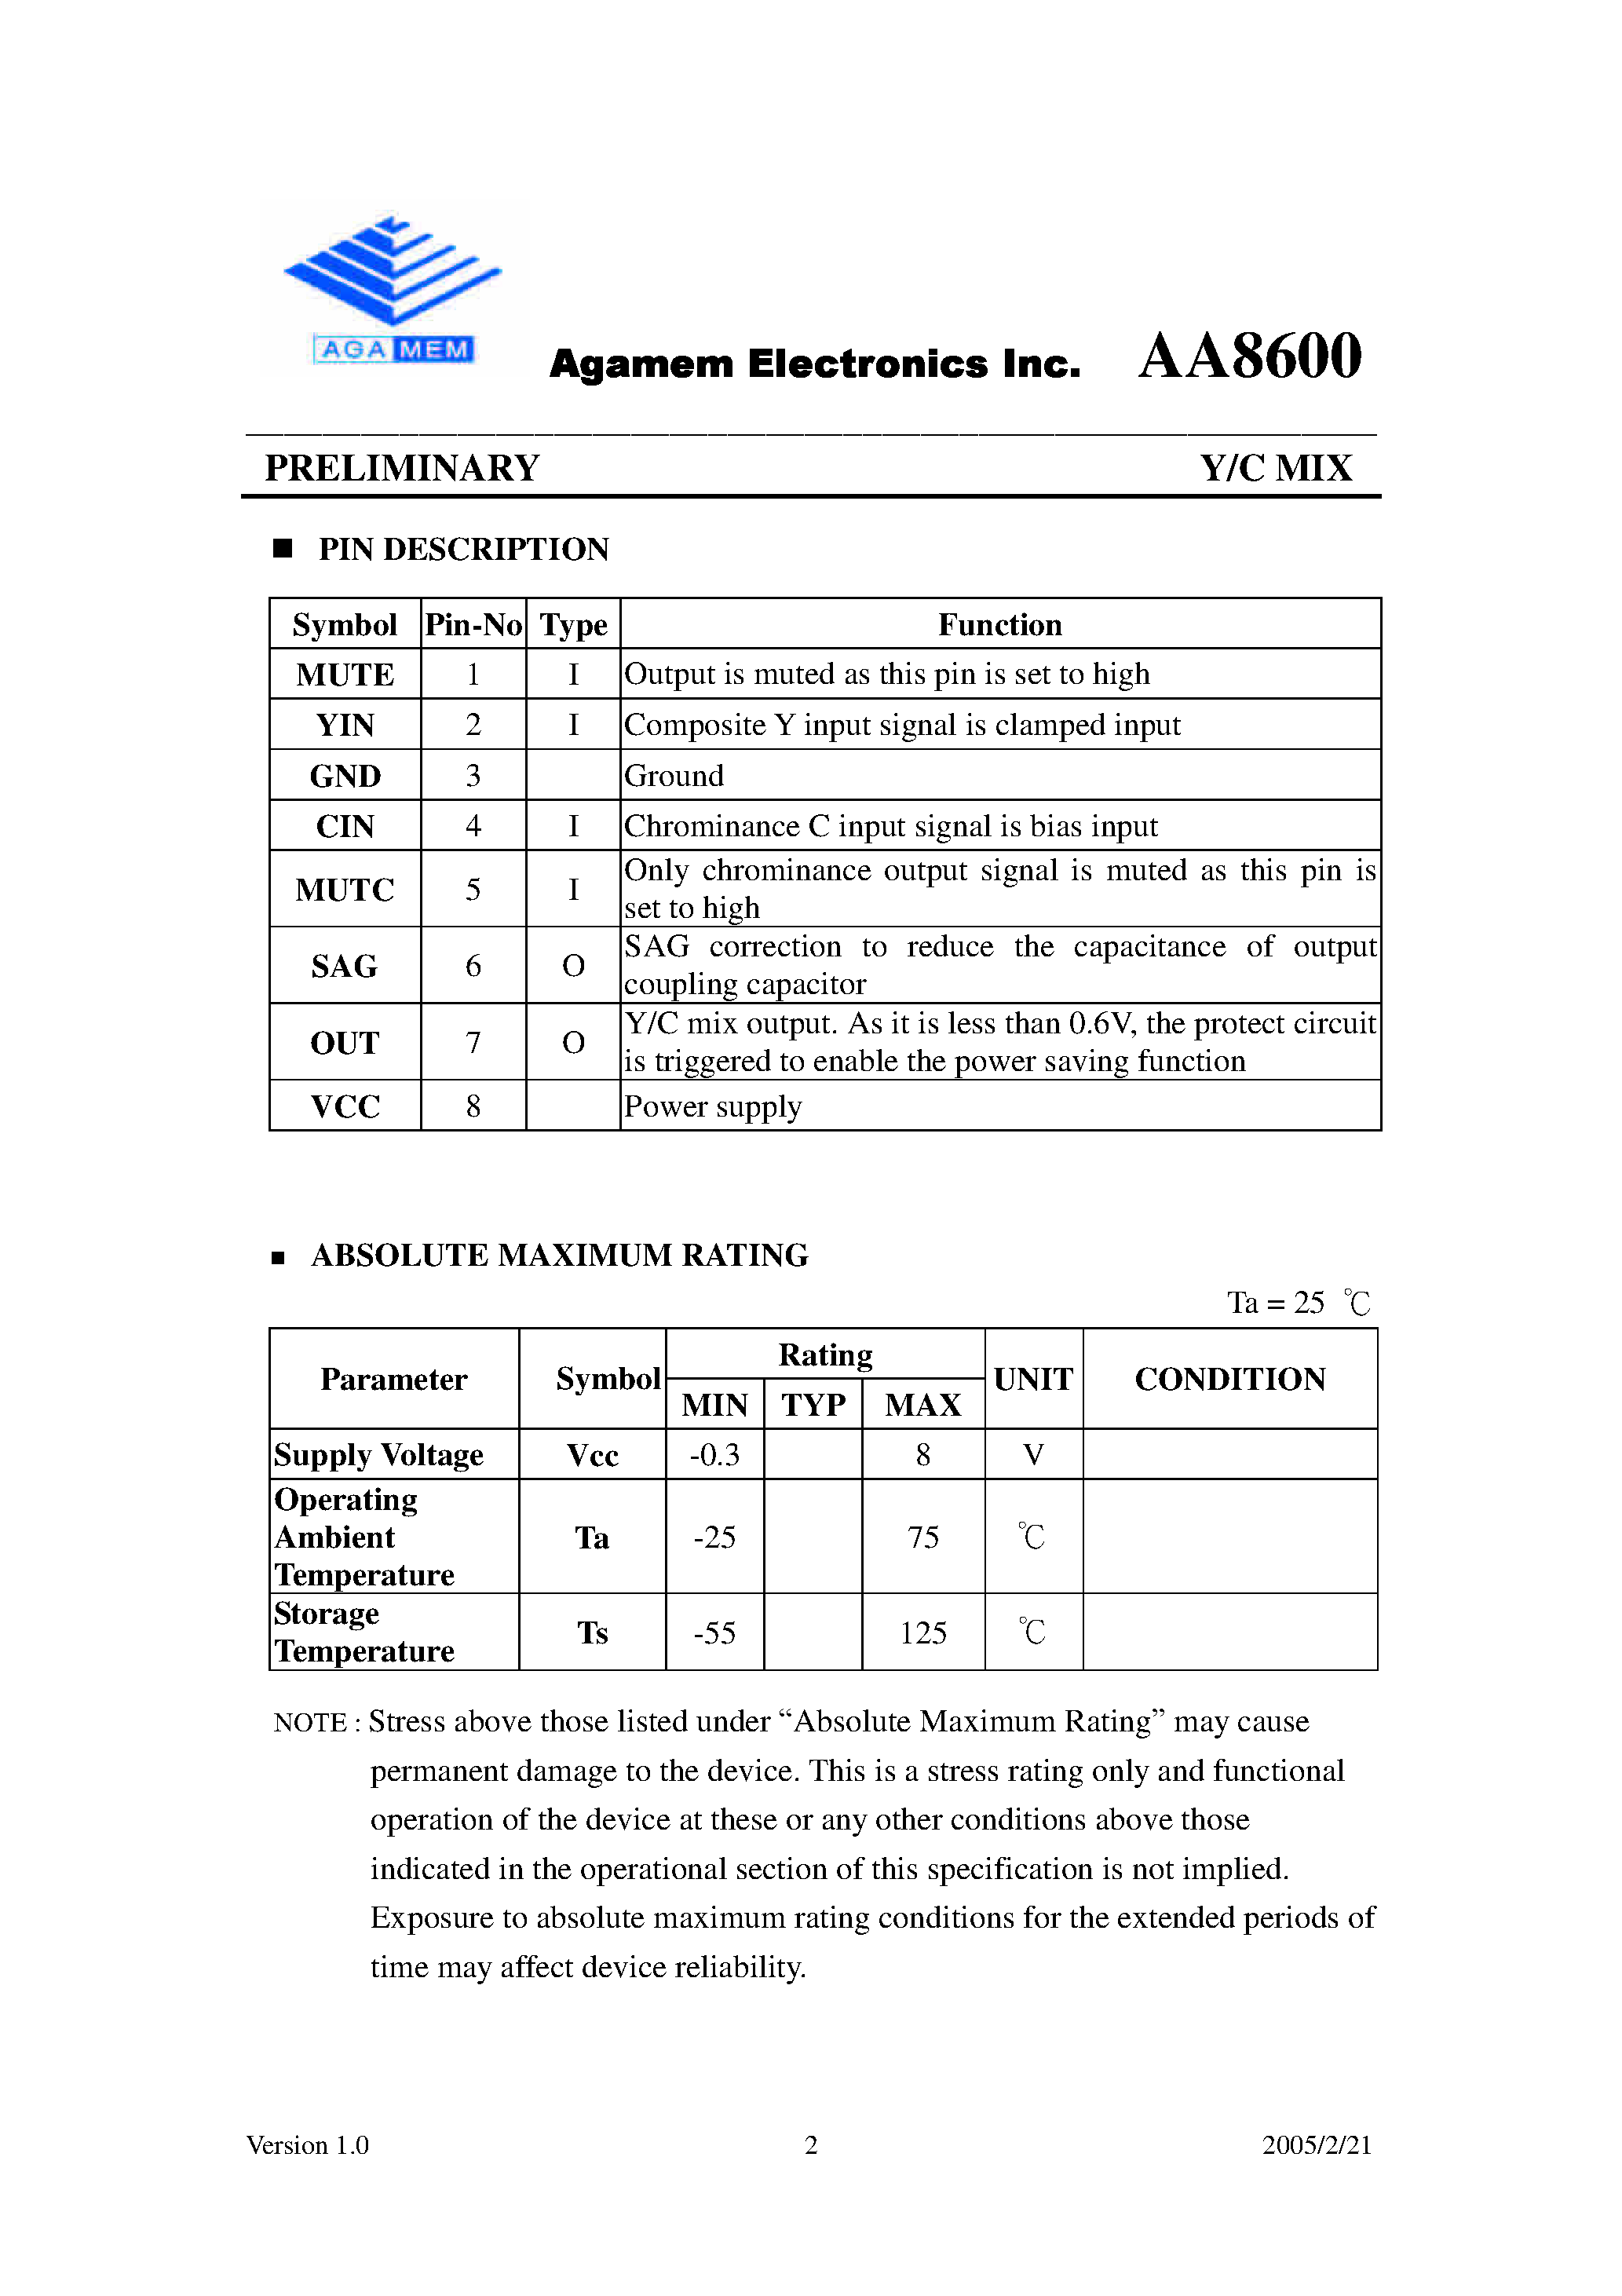 Datasheet AA8600 - Preliminary / Y/C MIX page 2